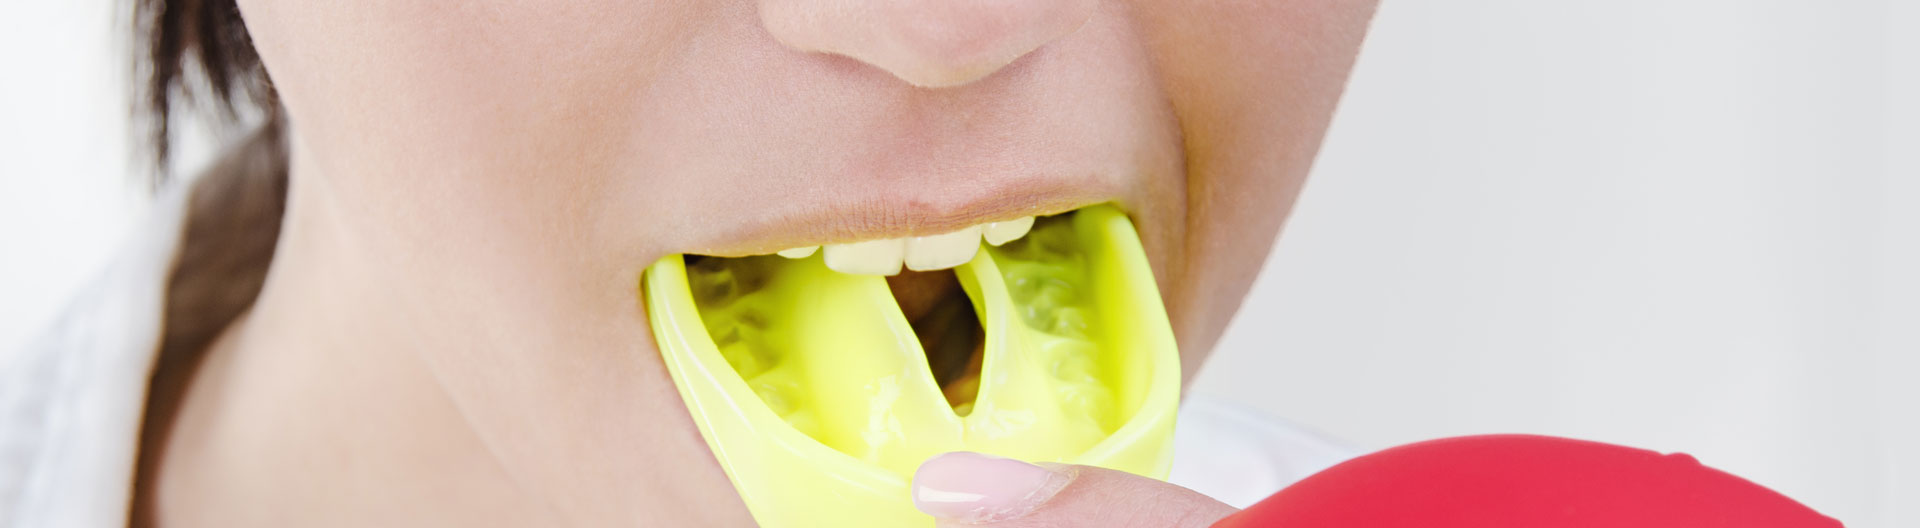 Athletic Mouth Guards Prescott WI - Protect Your Teeth Injuries